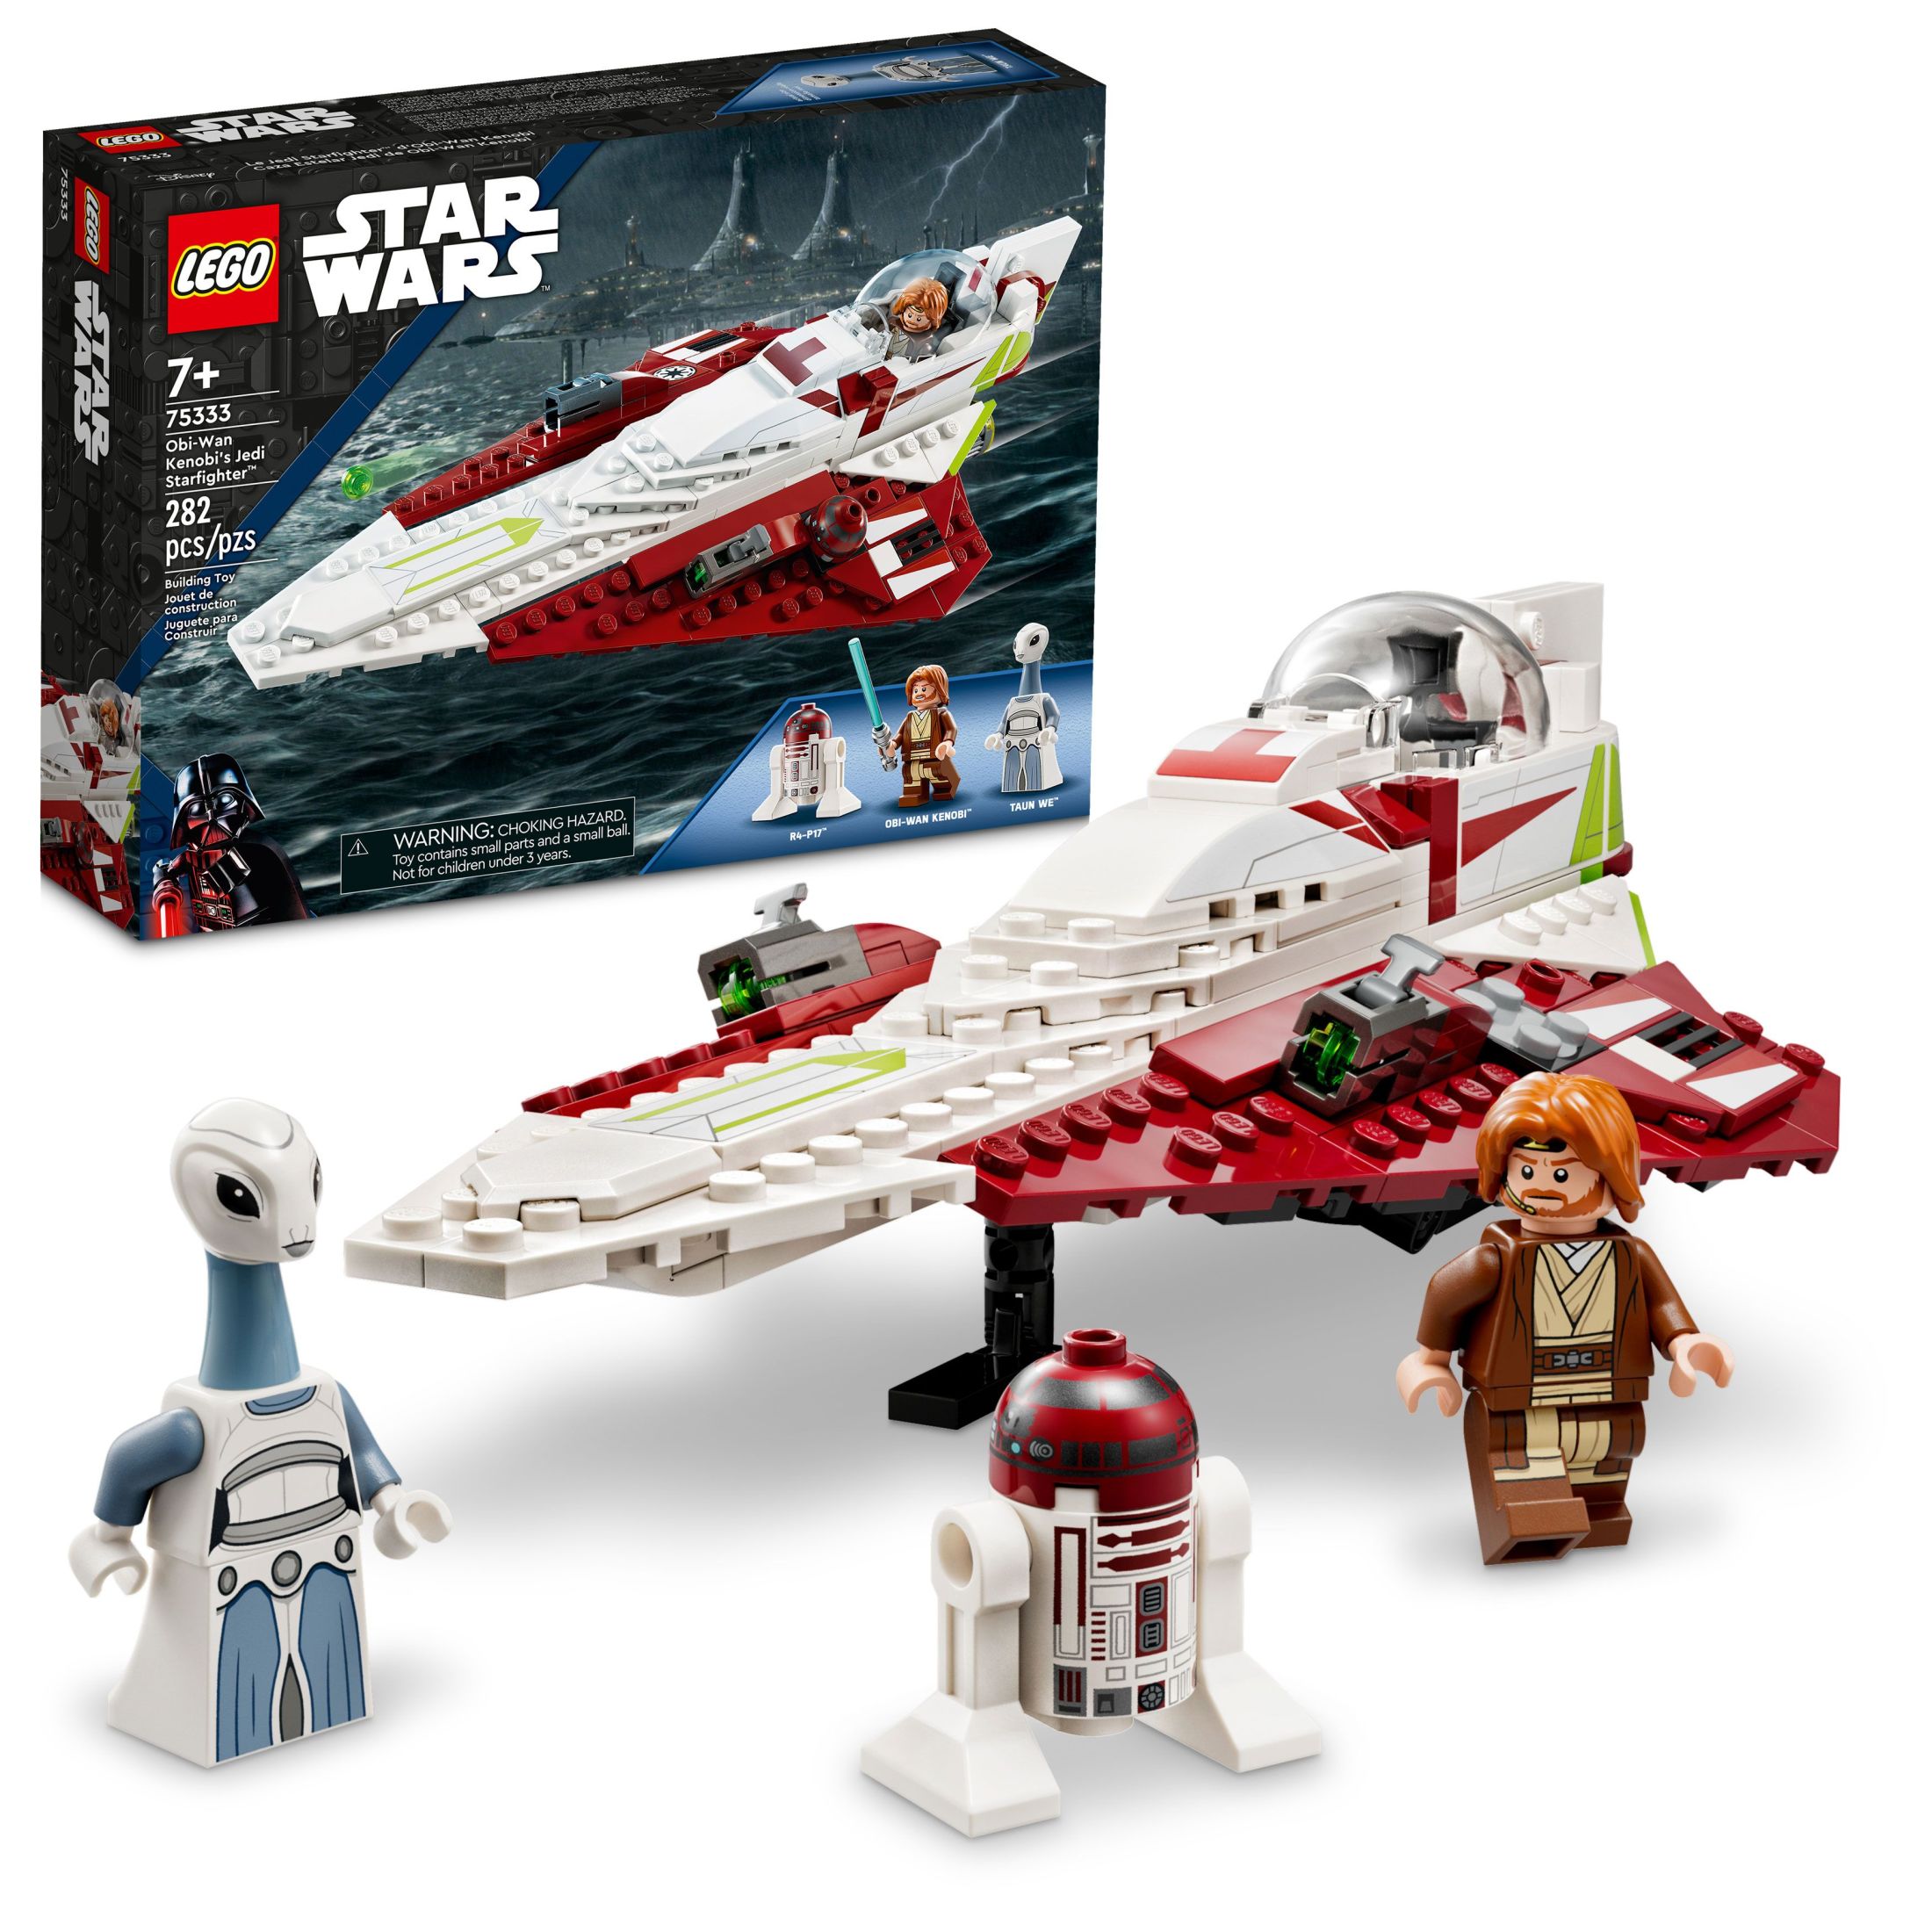 LEGO Star Wars Obi-Wan Kenobi’s Jedi Starfighter 75333, Attack of the Clones Building Set with Taun We Minifigure, Droid Figure and Lightsaber, Gift Idea for Grandchildren or Star Wars Fans Ages 7+ - image 1 of 9